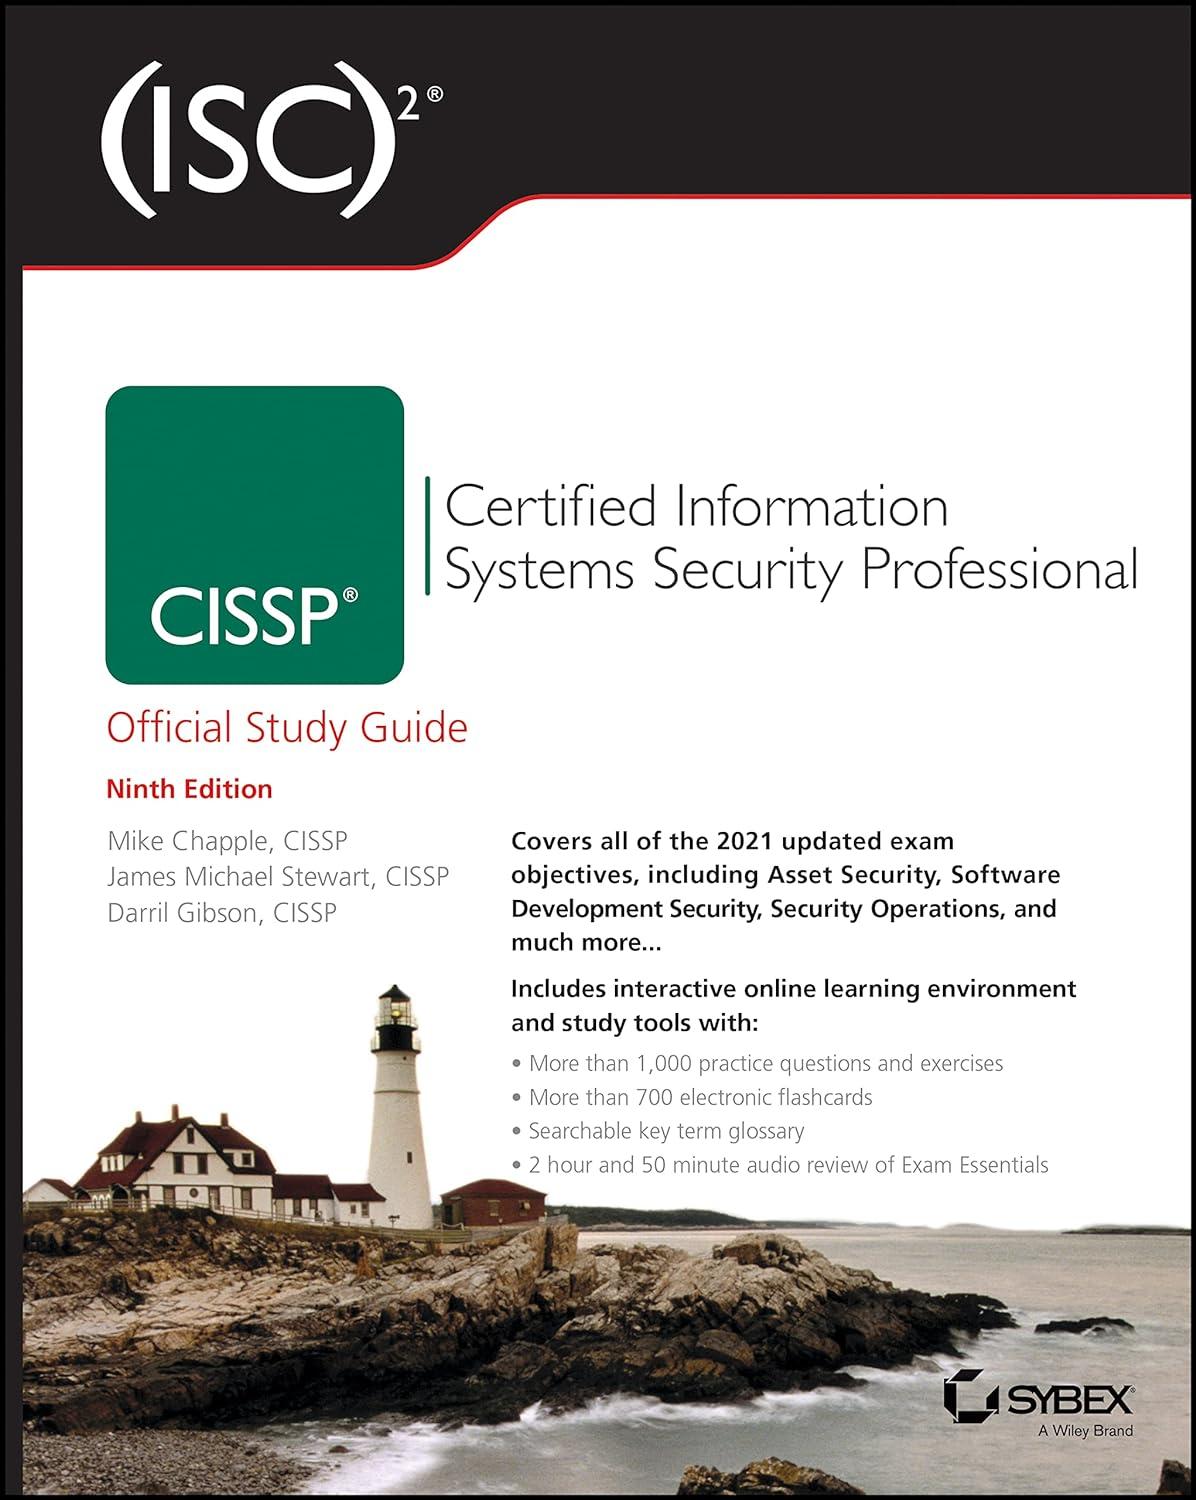 (isc)2 cissp certified information systems security professional official study guide 9th edition mike